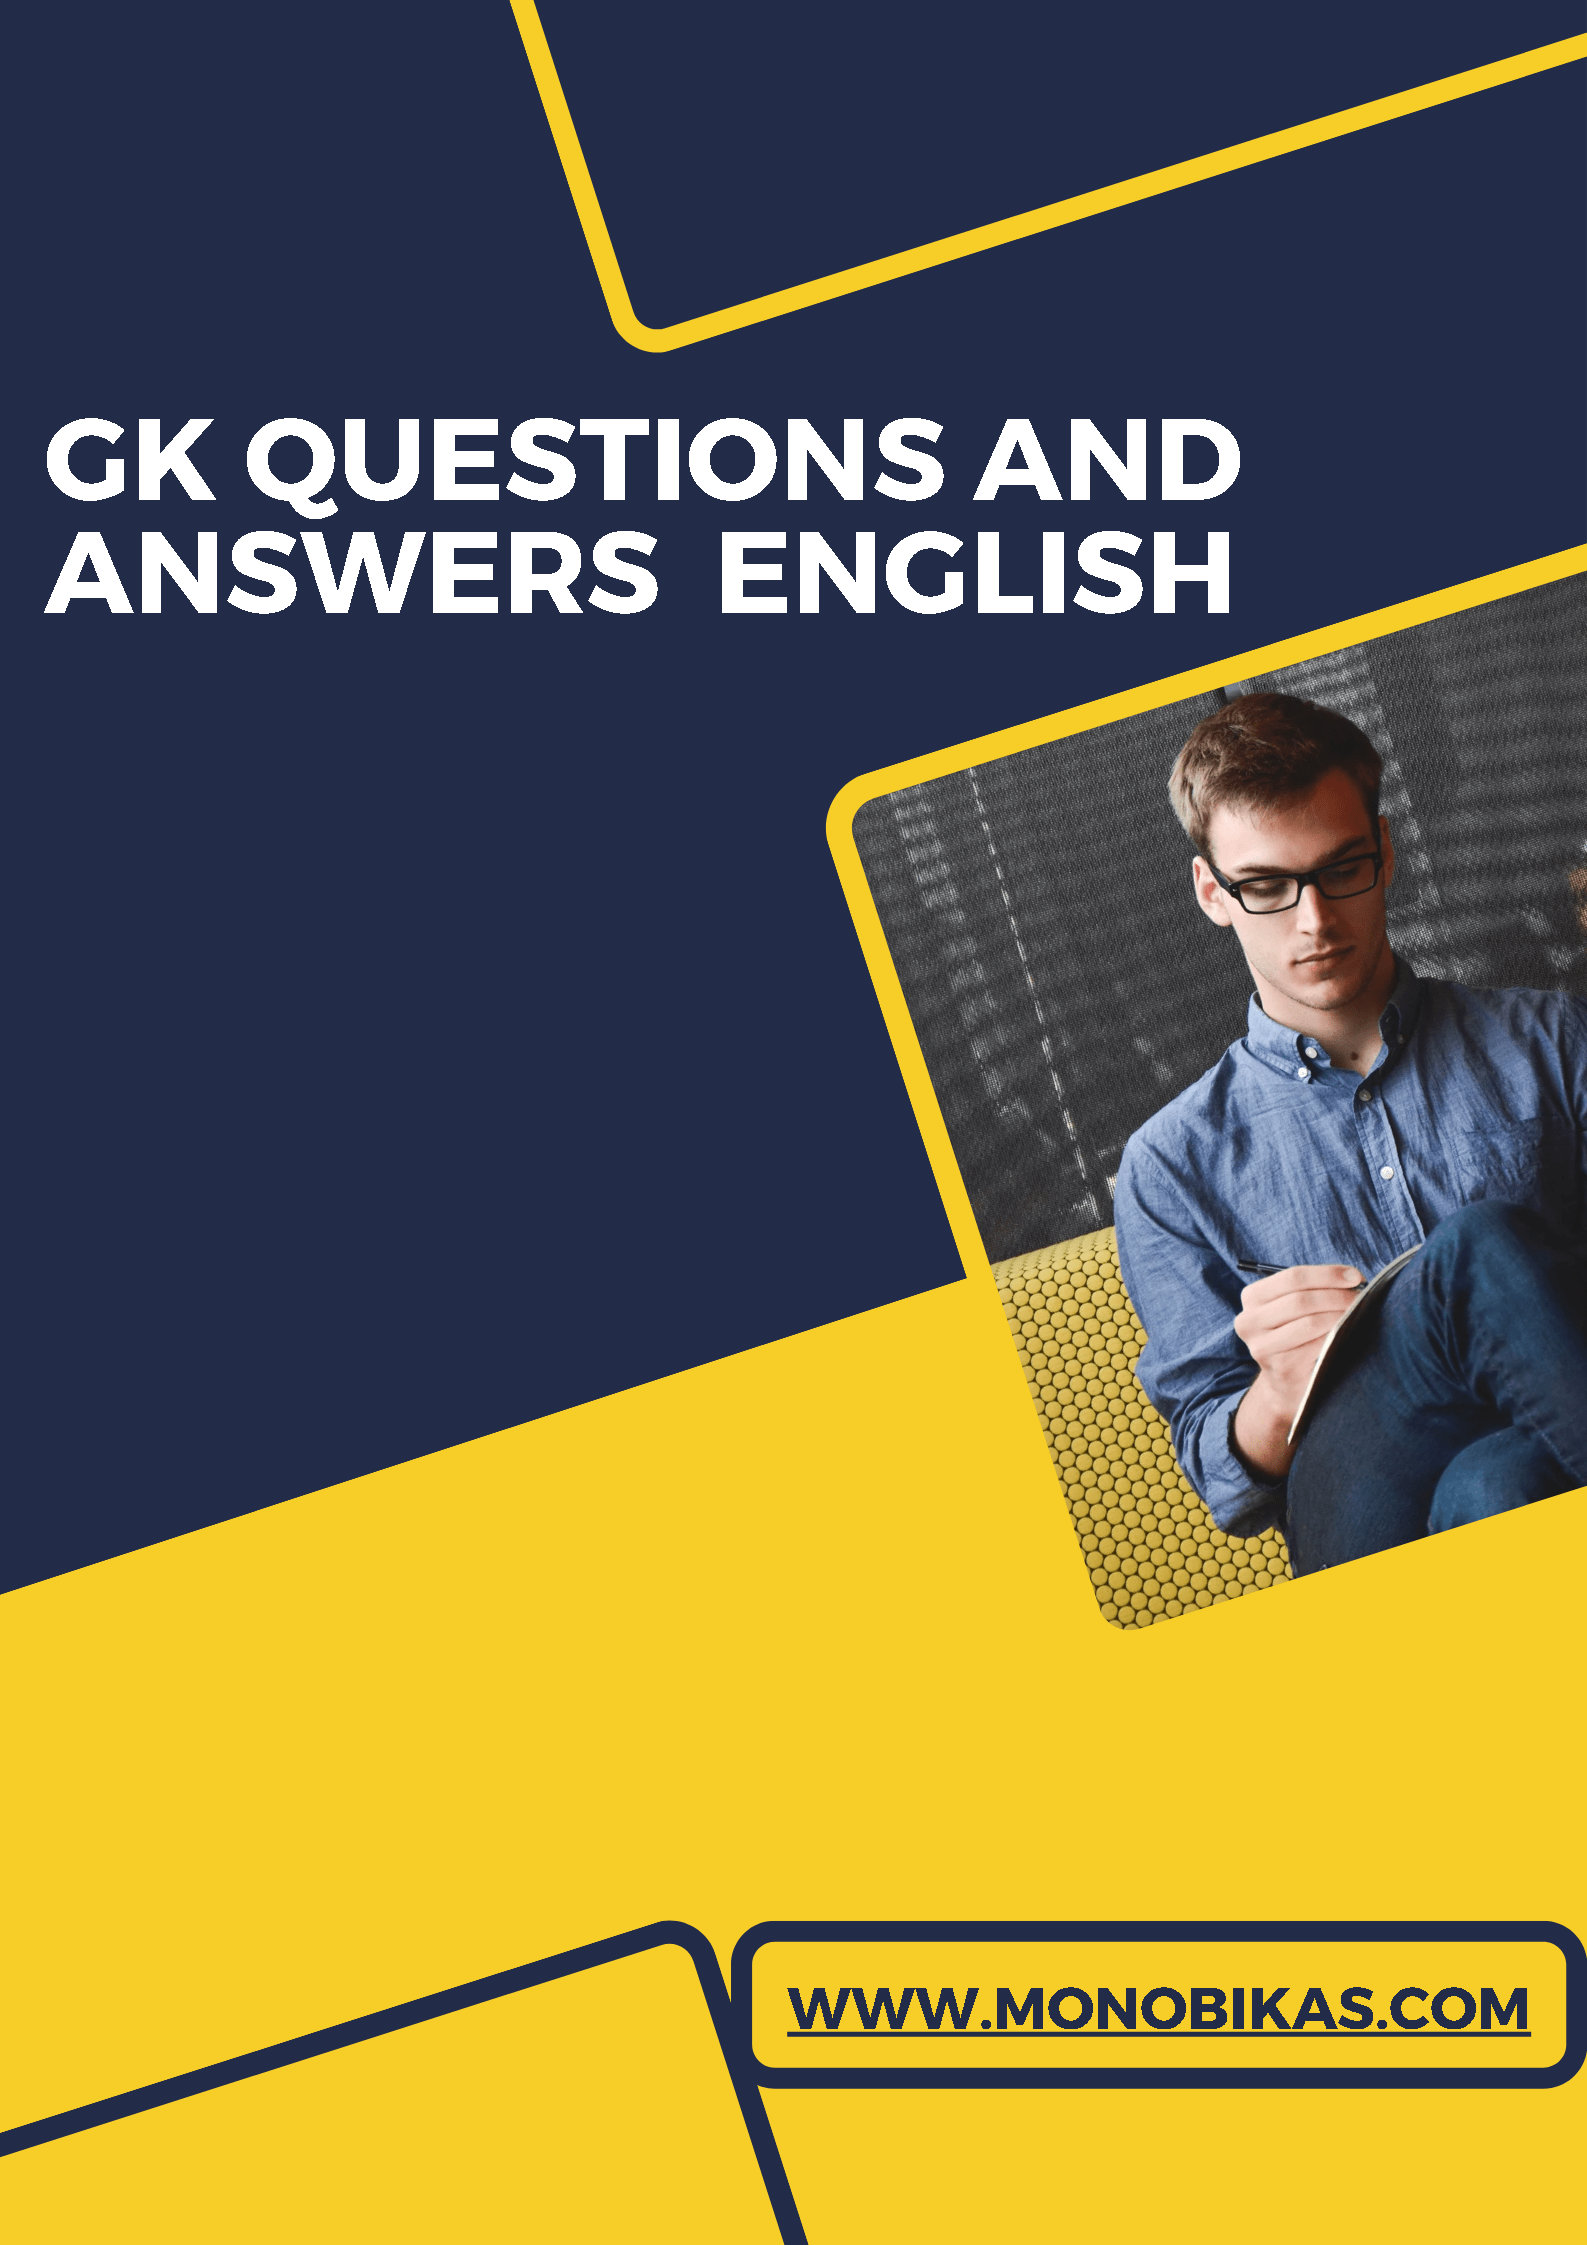 SSC gk questions and answers